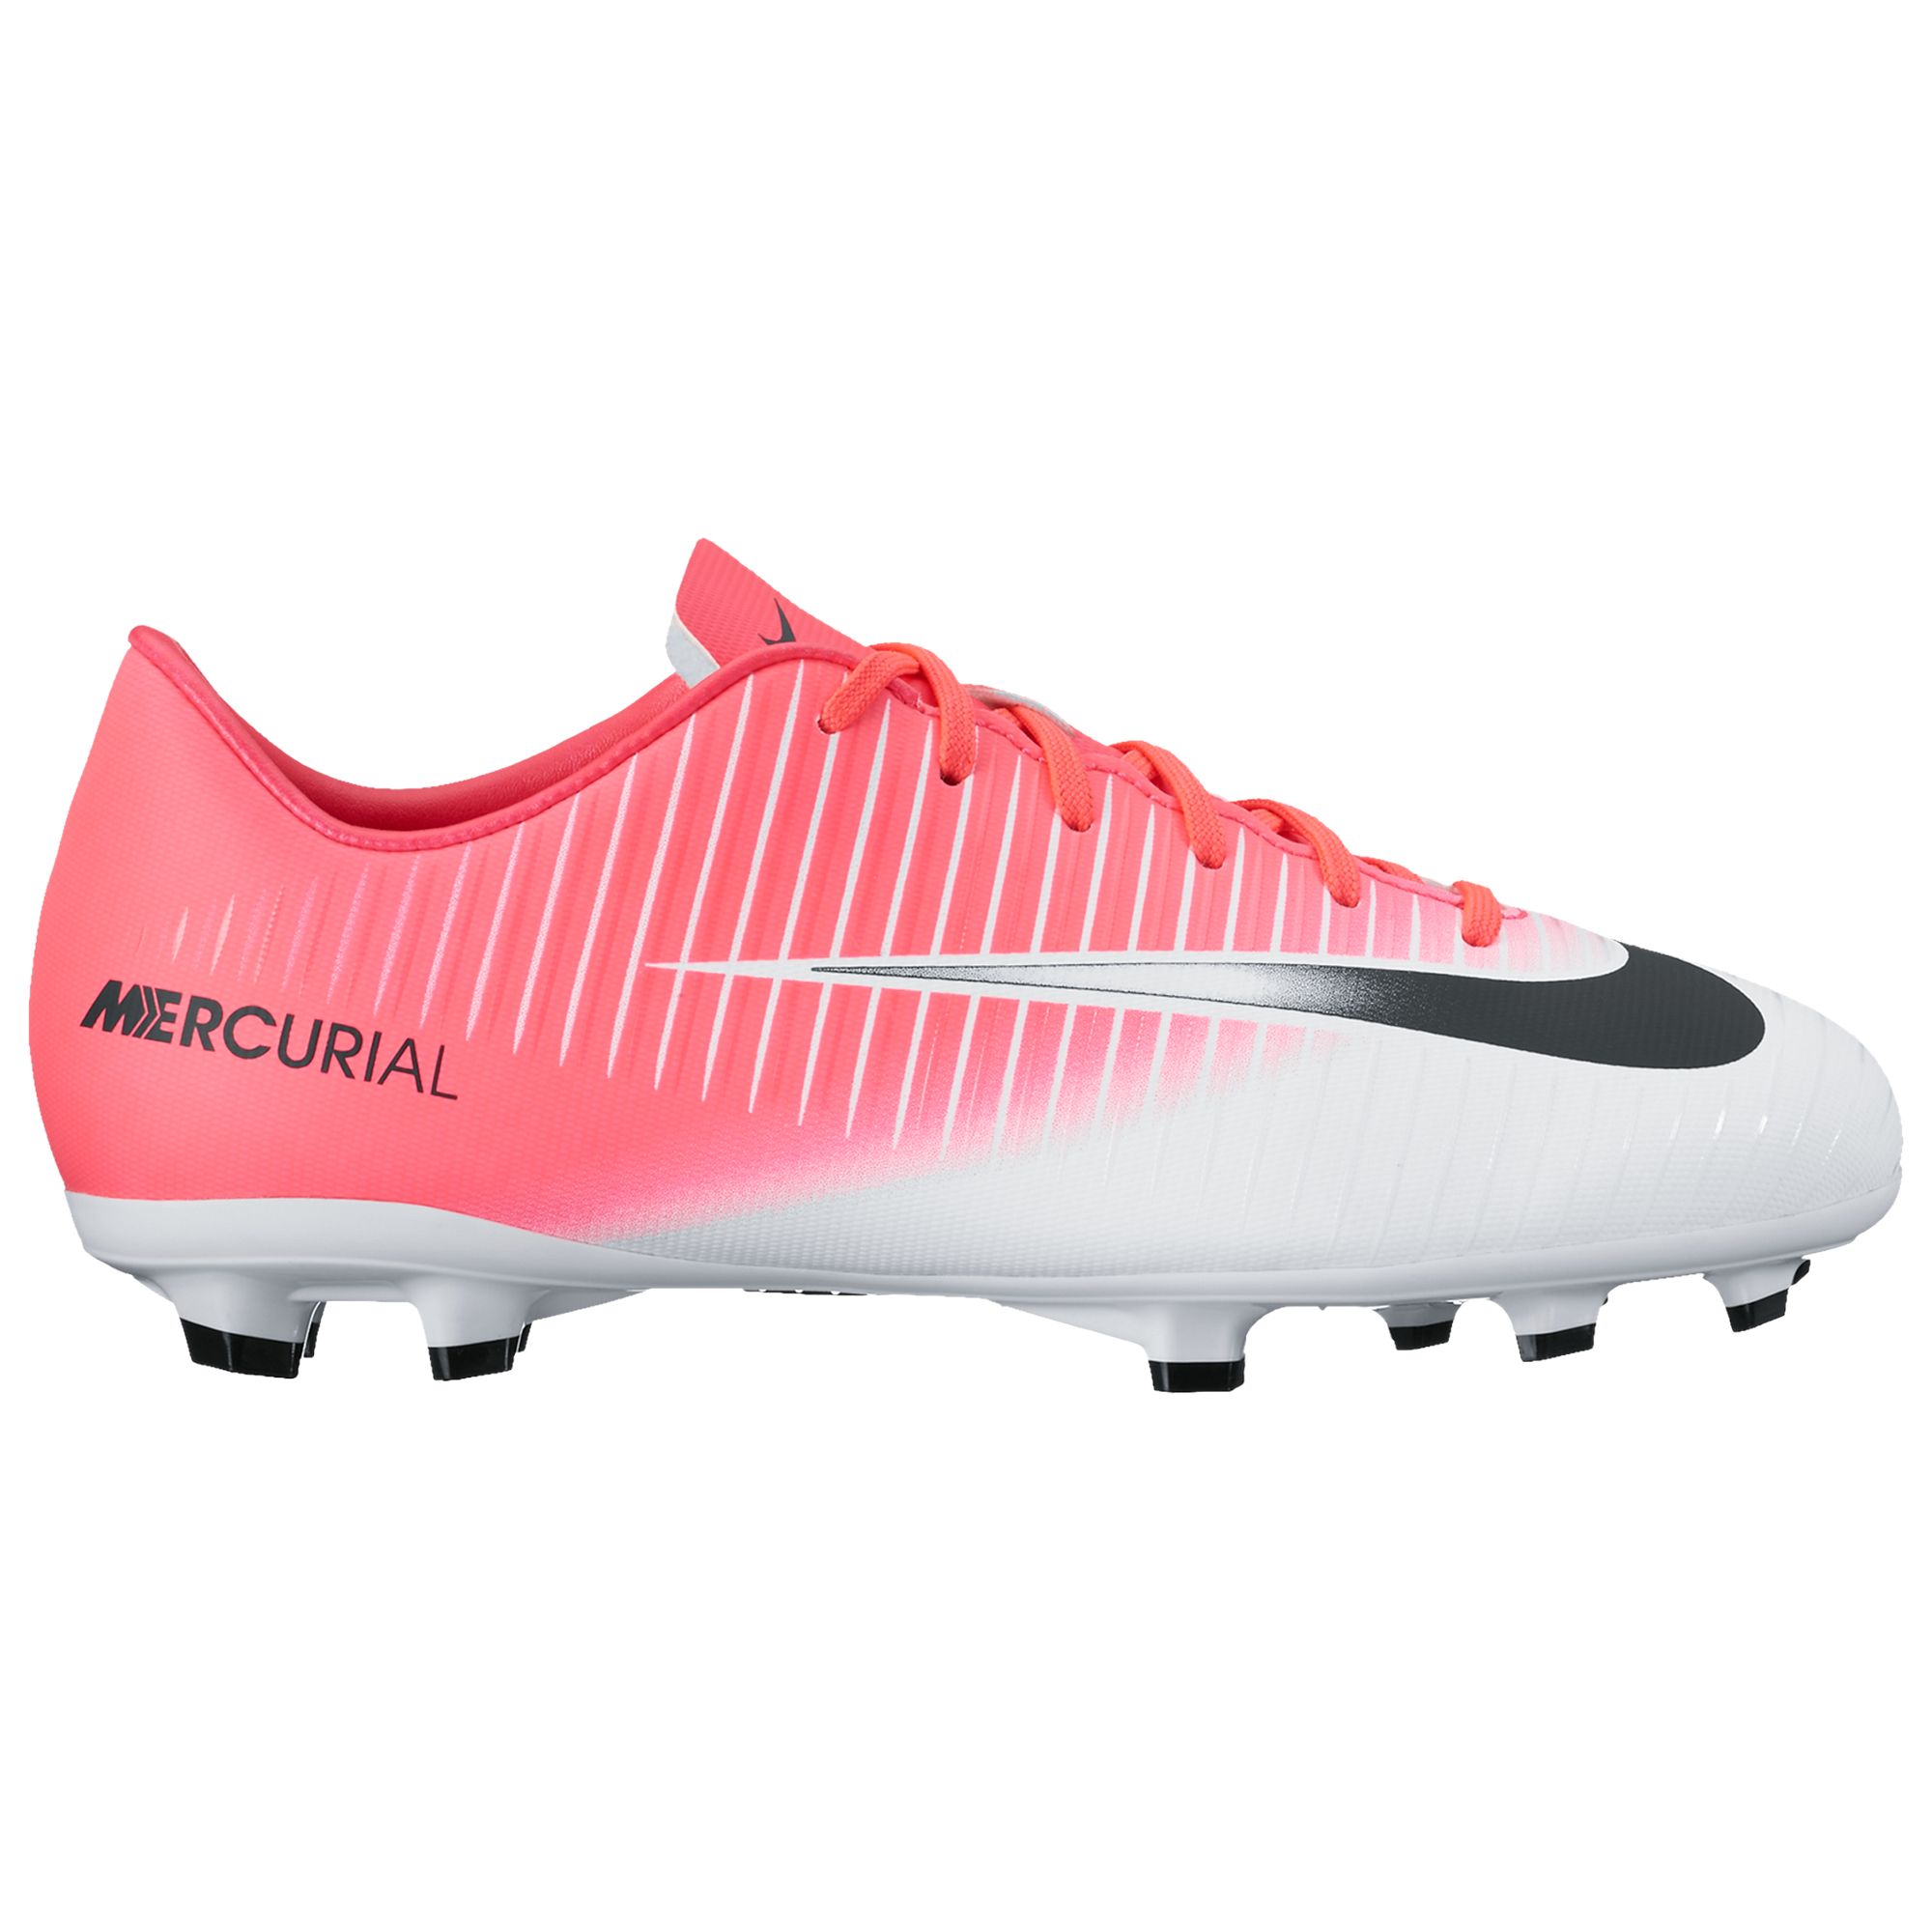 buy nike boots online